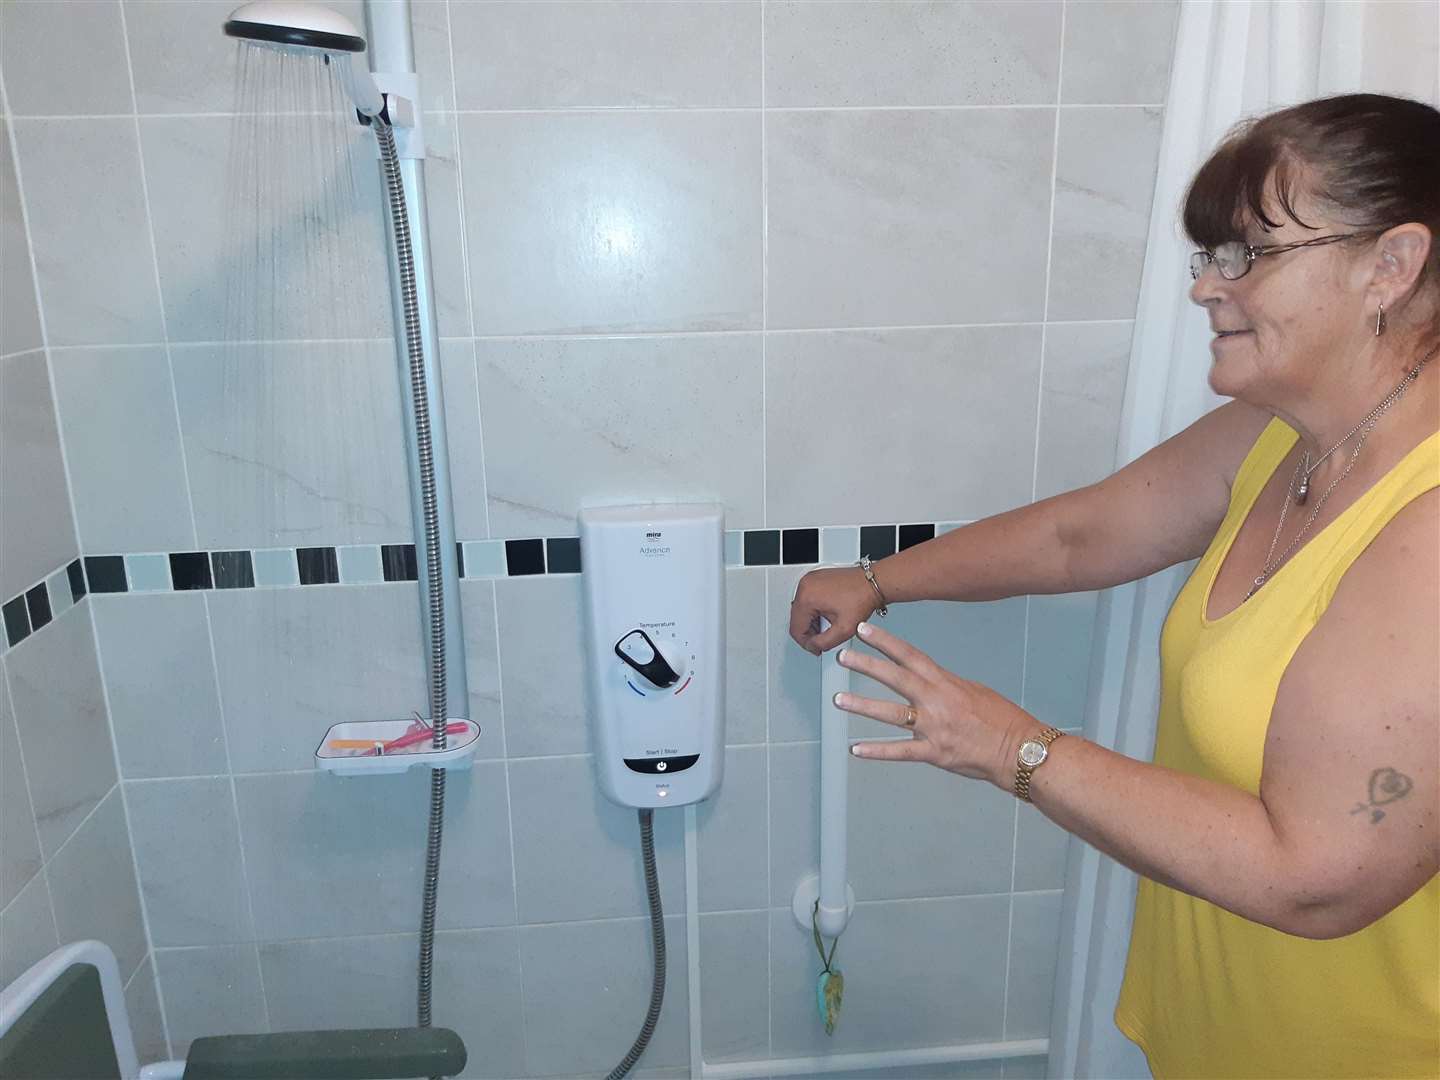 Annette Lewis-Rendle is having problems with her shower which will only run water for around 60 seconds